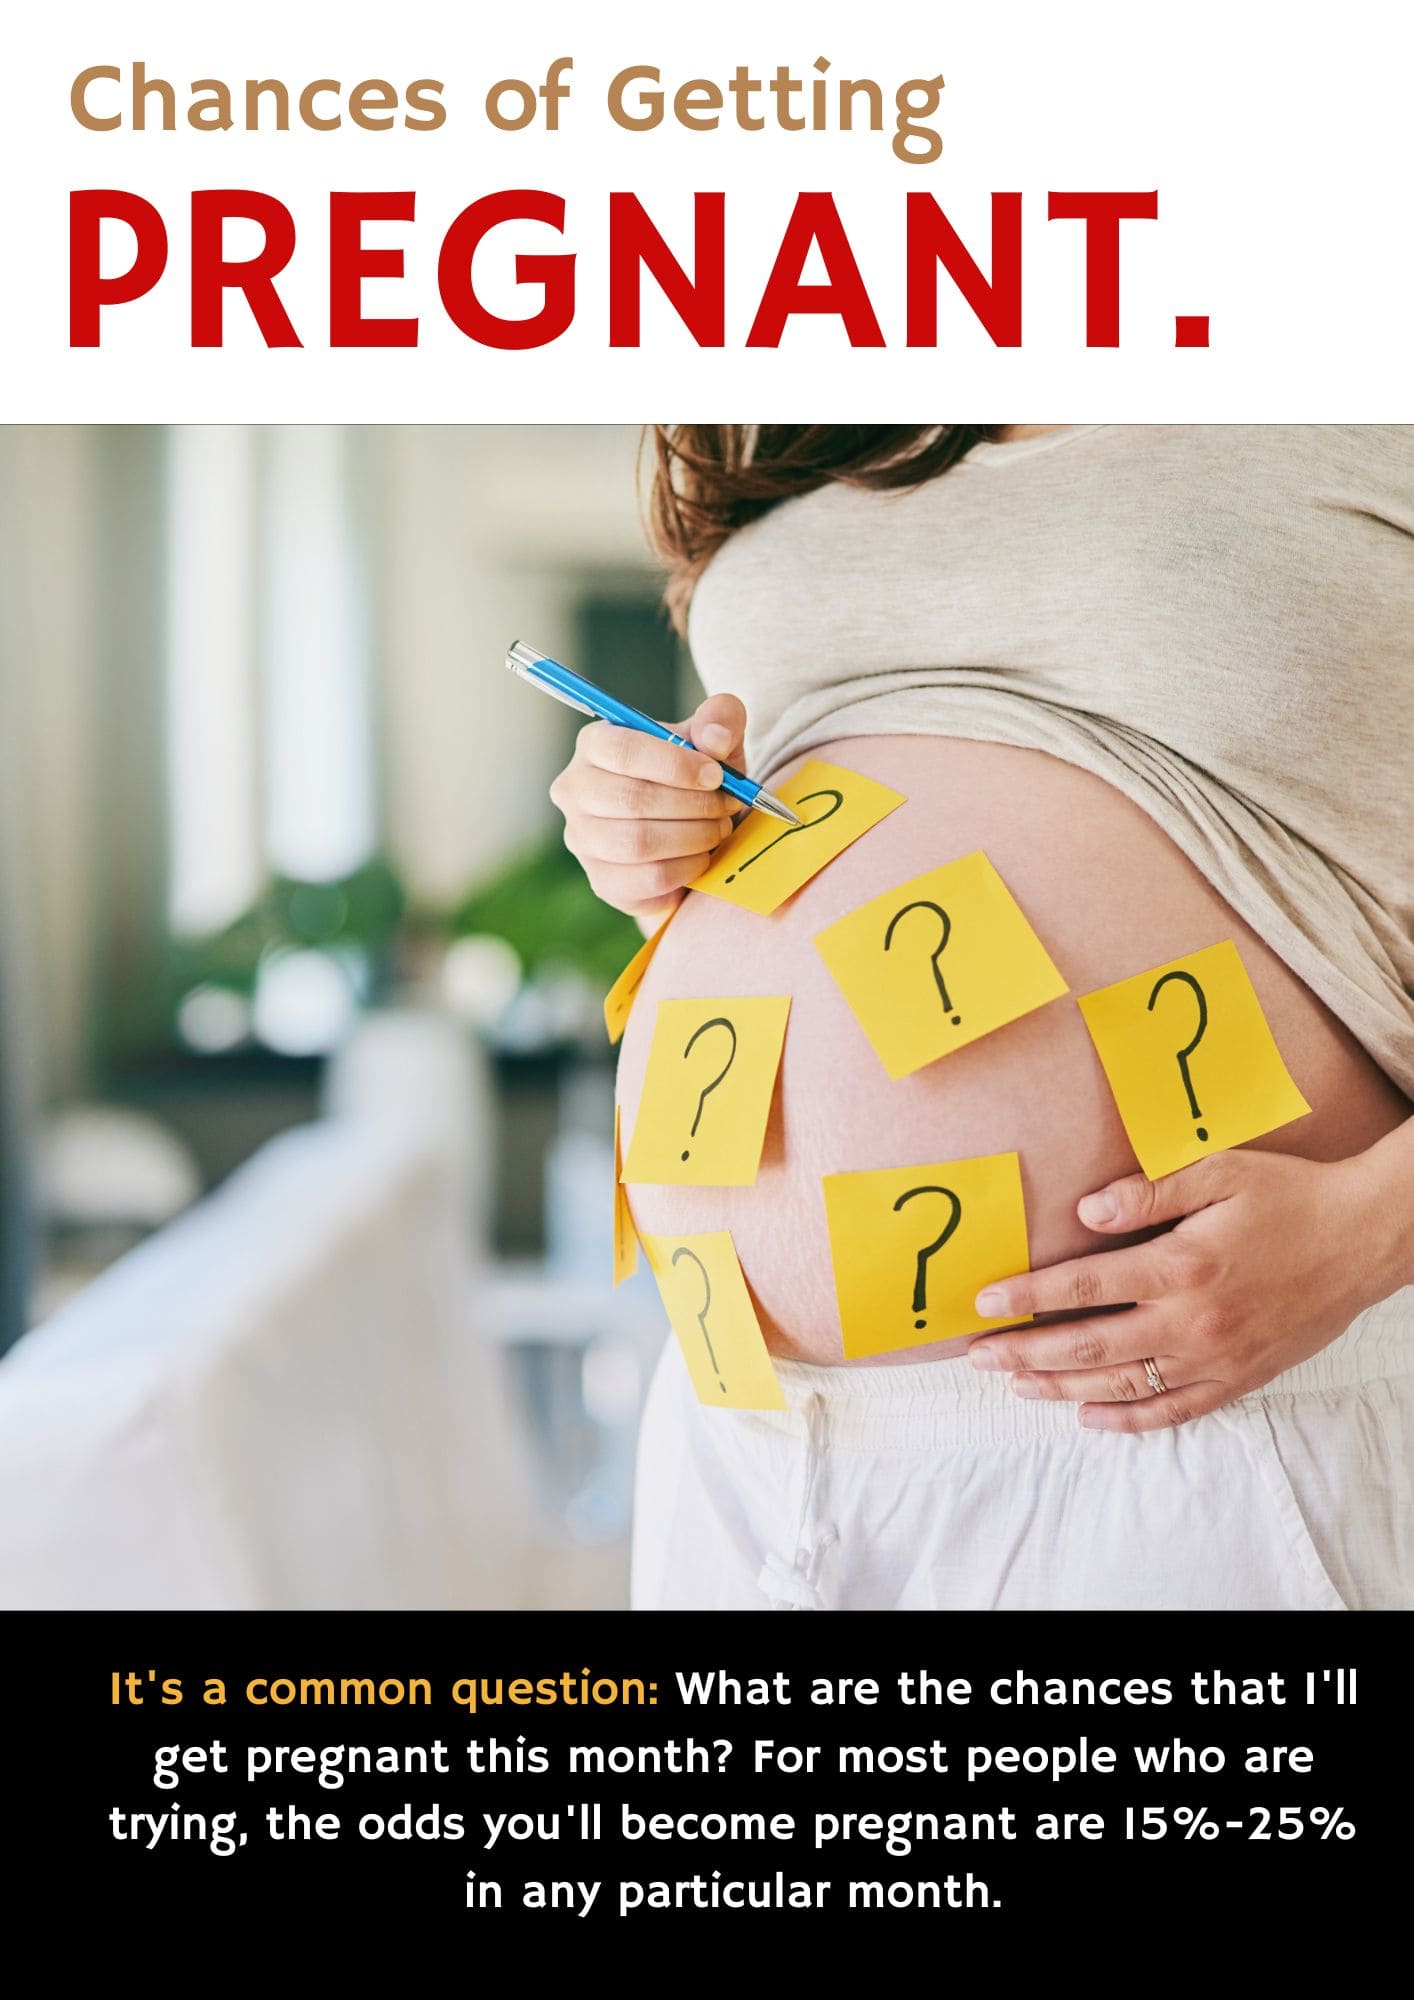 Chances of Getting PREGNANT.